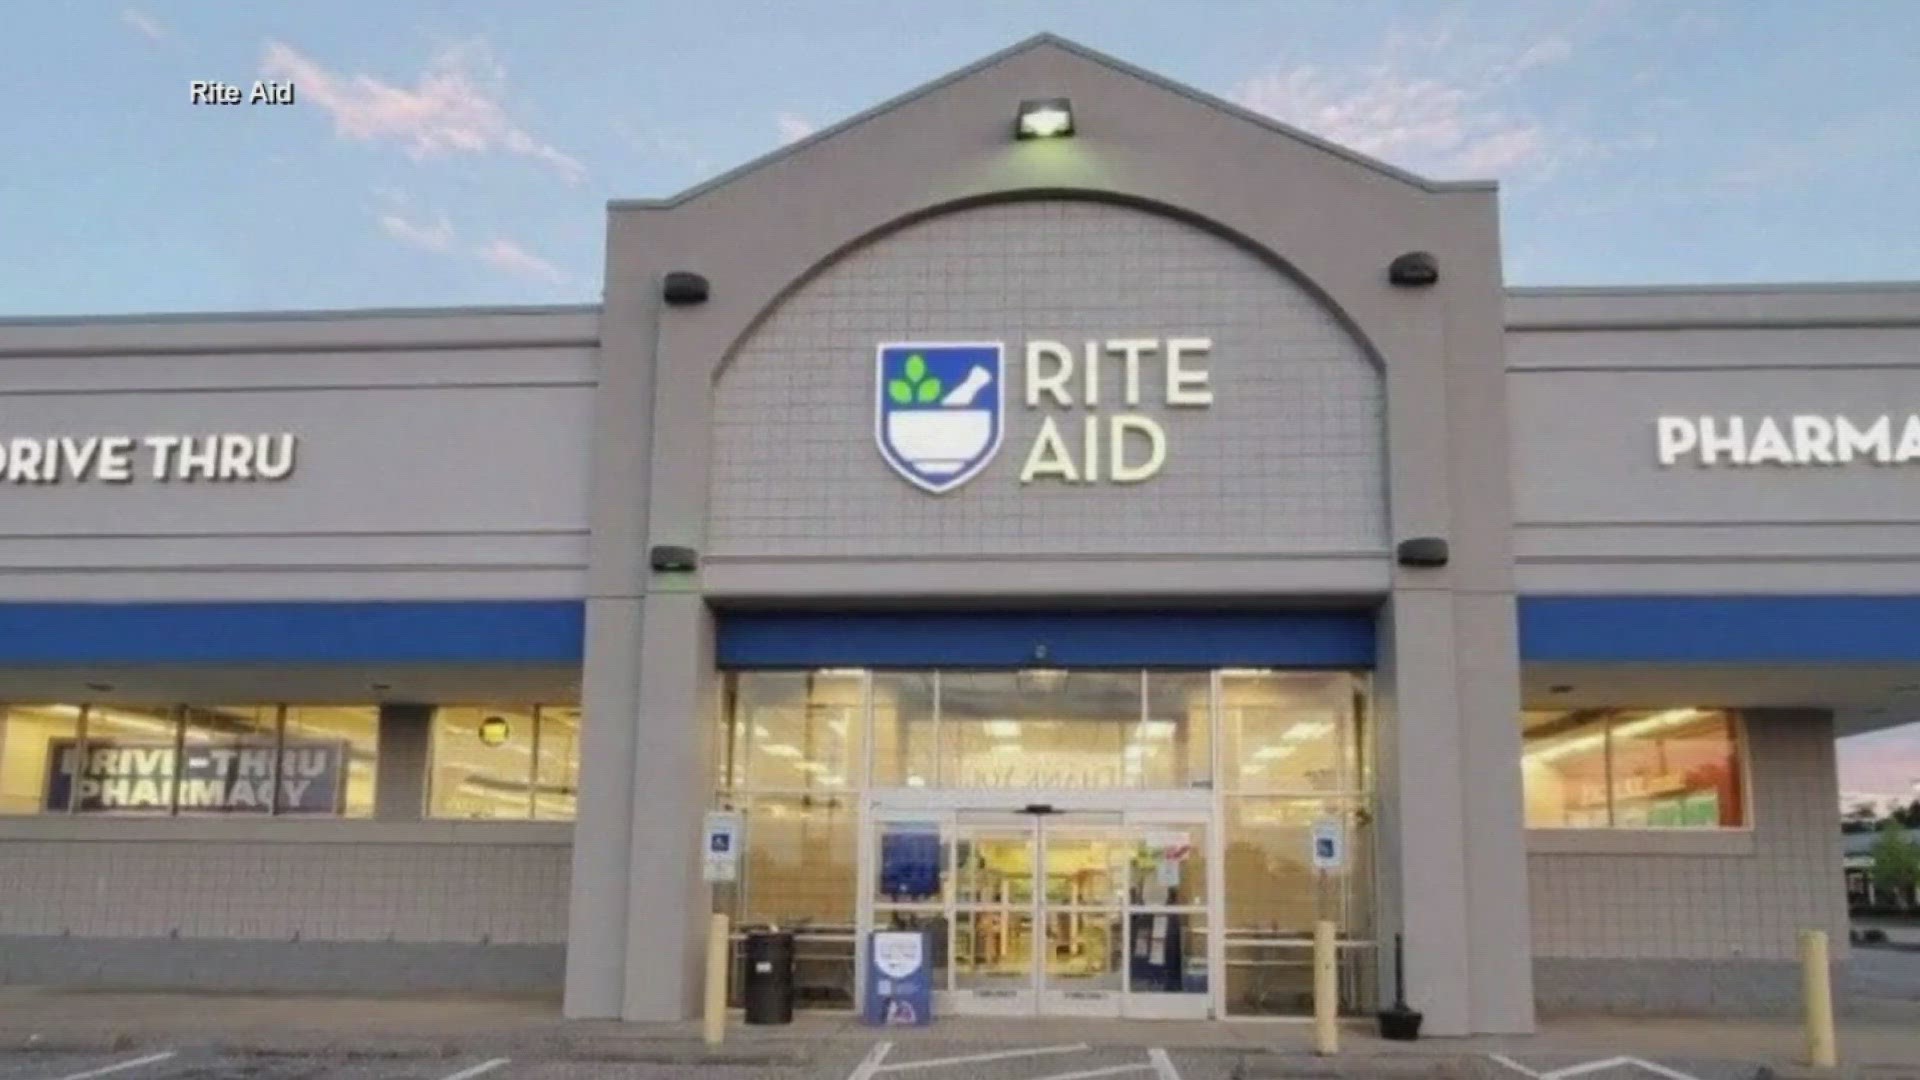 Rite Aid says it plans on closing up to 500 stores as part of